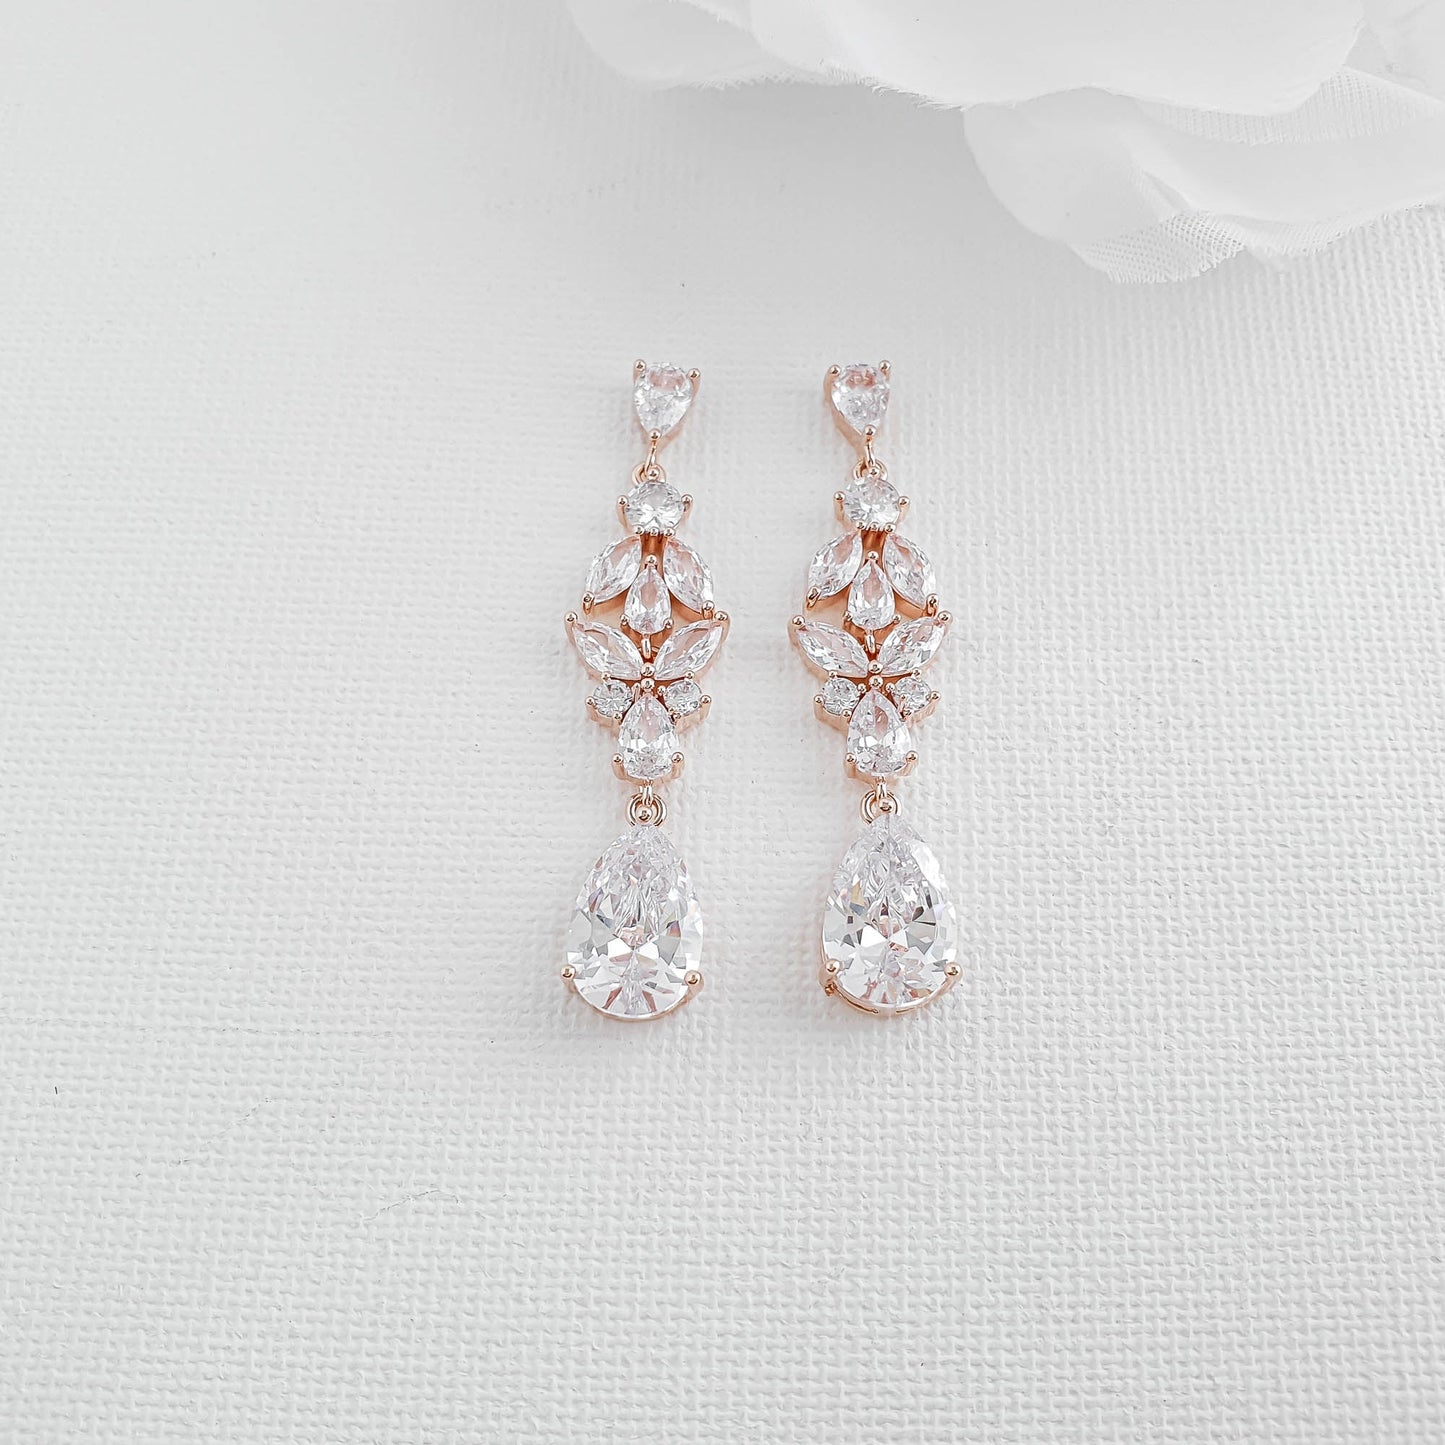 Bridal Drop Earrings in Silver and Cubic Zirconia Stones-Anne